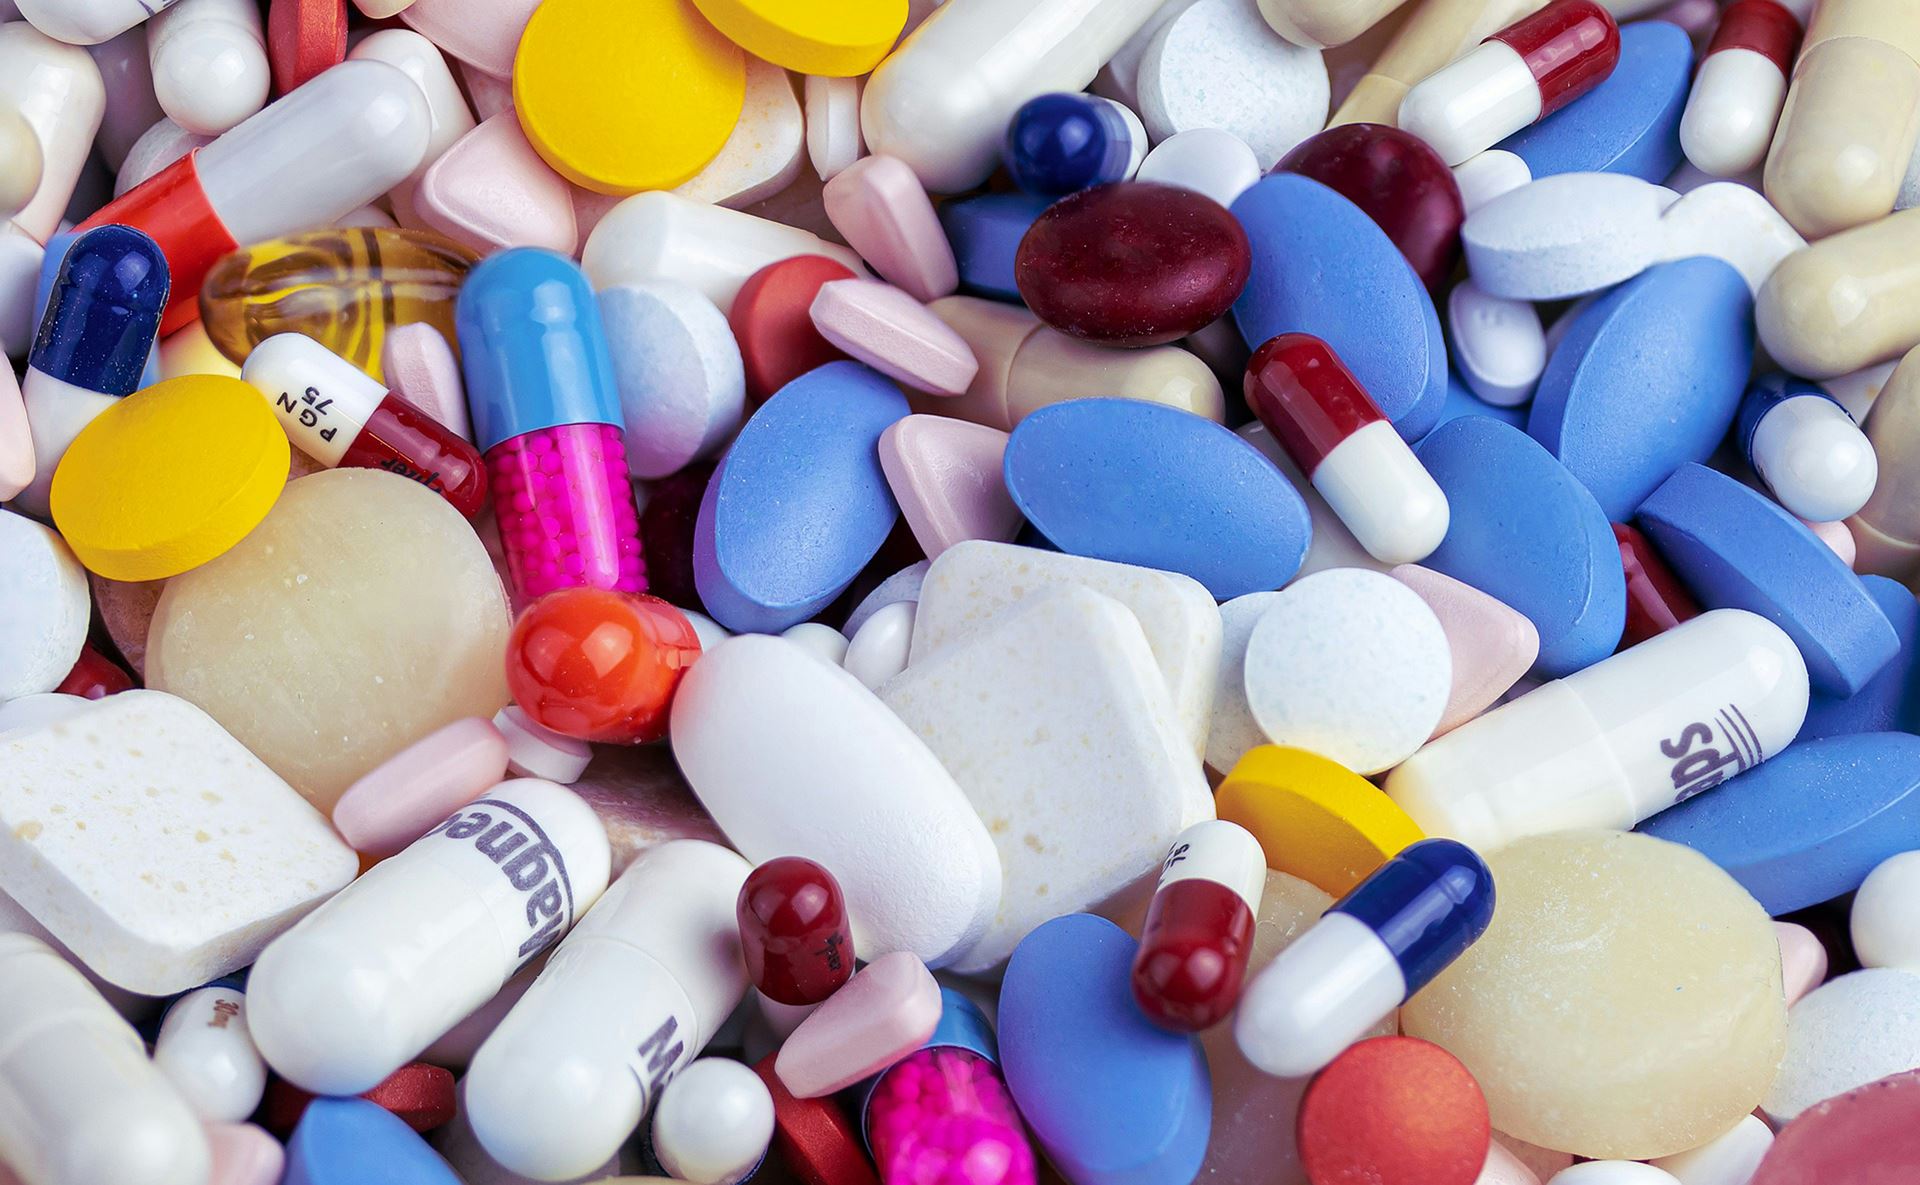 pills and medication on a table